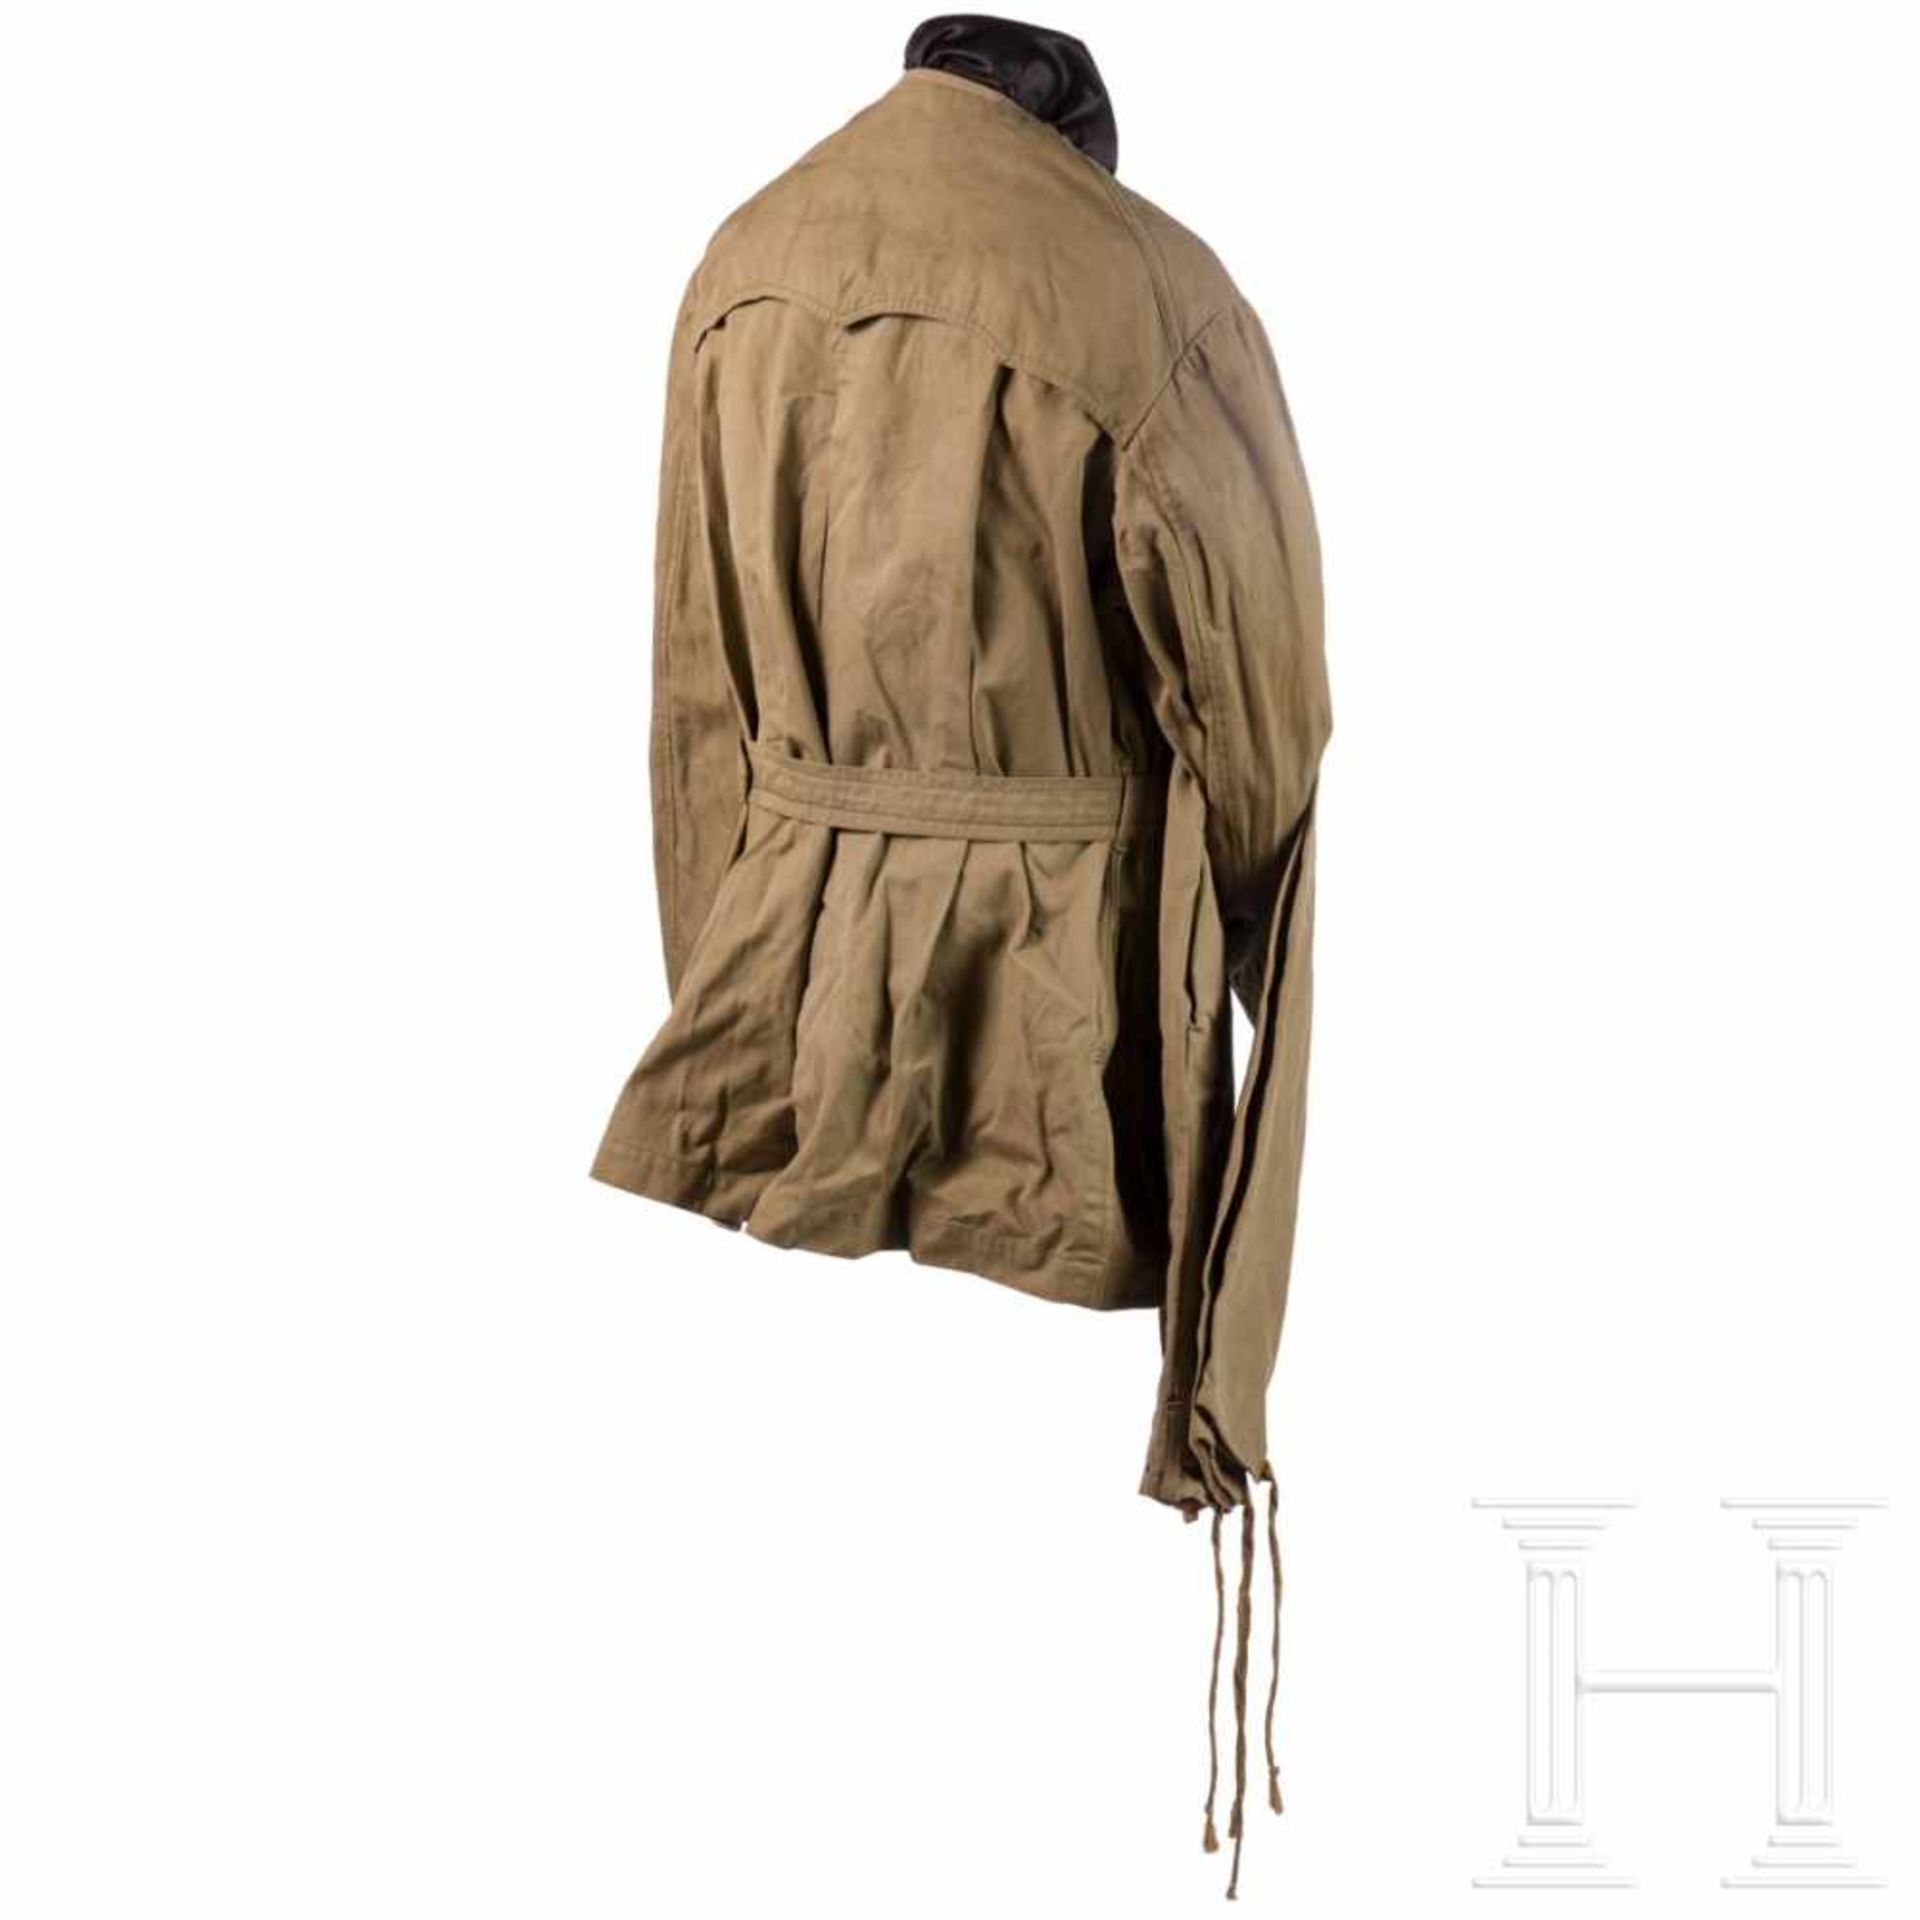 A summer uniform for a training officer of the paratroopers in World War IIUniform tunic made of - Bild 2 aus 6